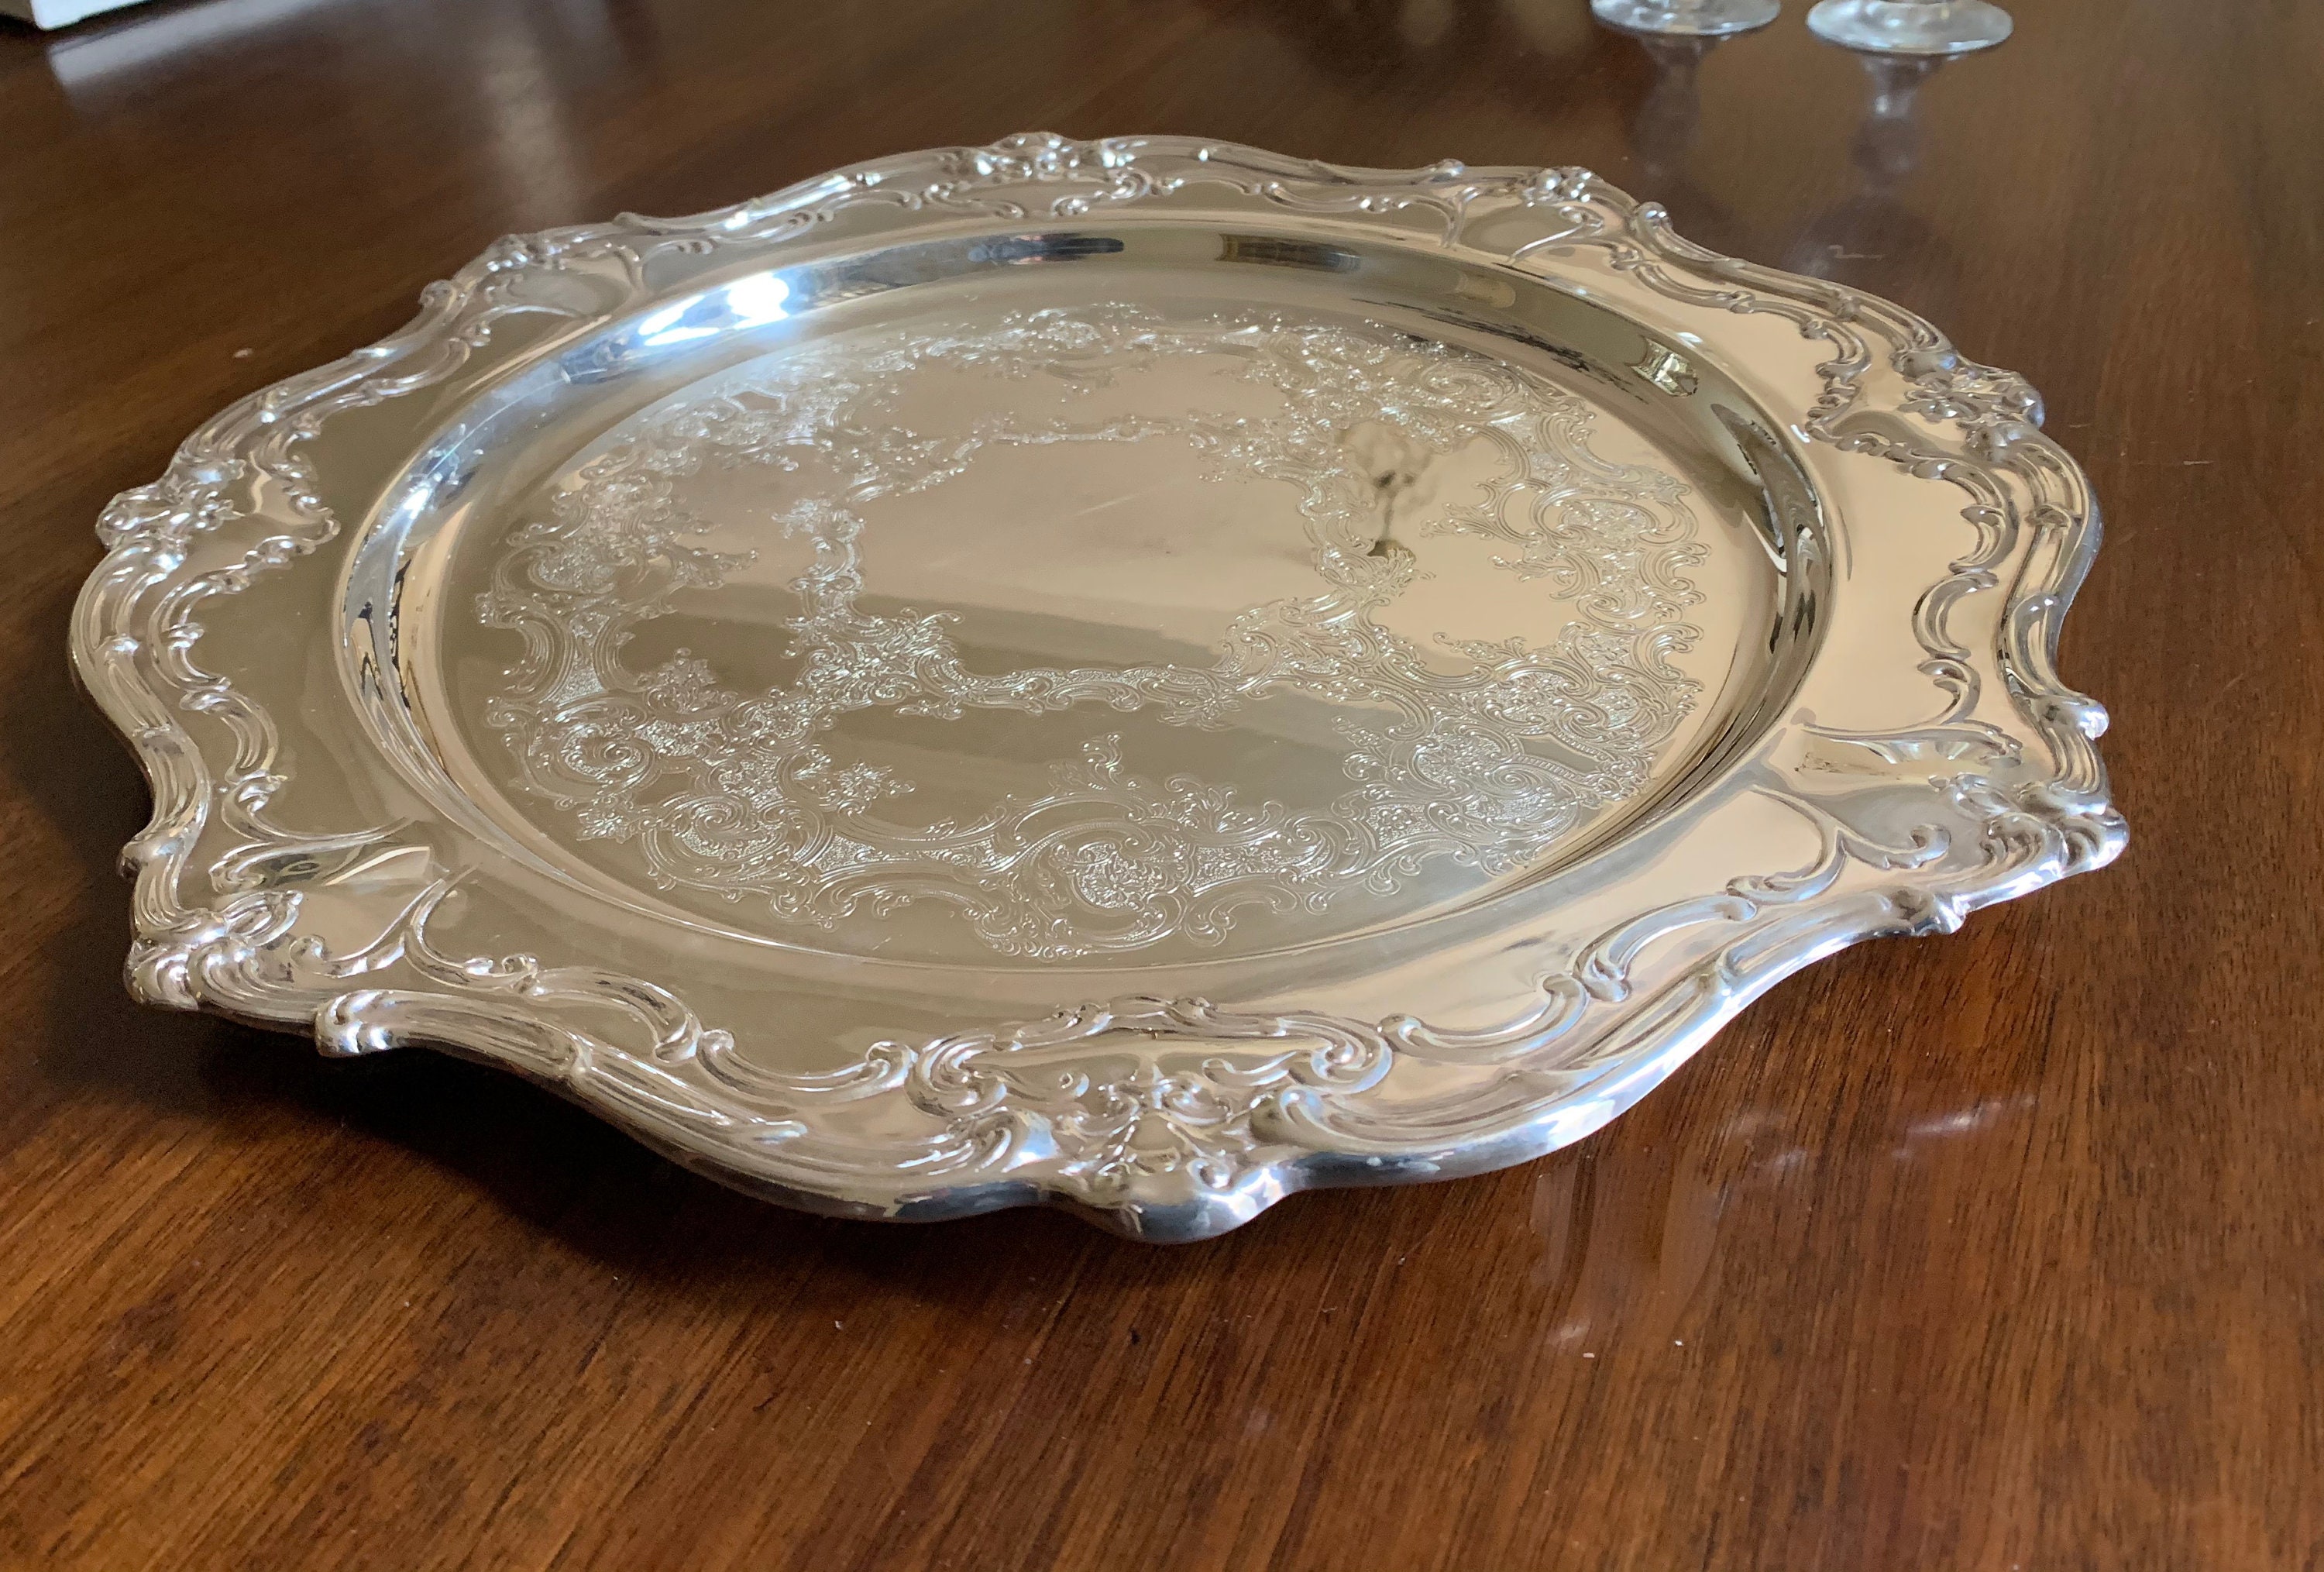 Round Scalloped Silver Tray, 16 Inch Silver Plate Tray, Vintage Gorham